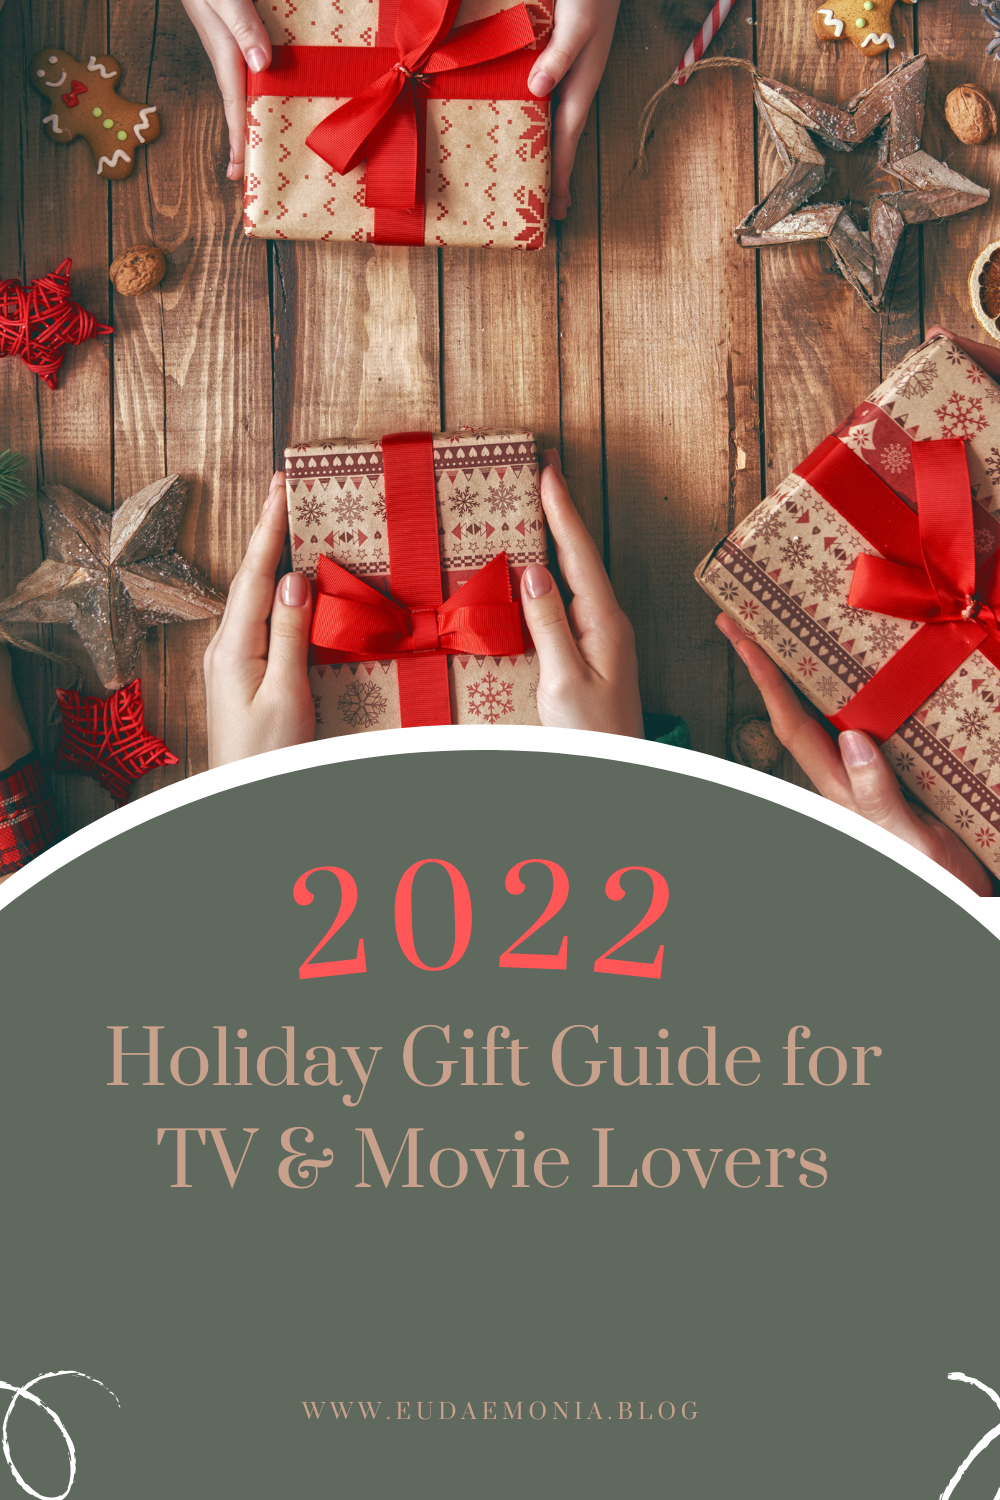 8 popular As Seen on TV gifts for the holidays